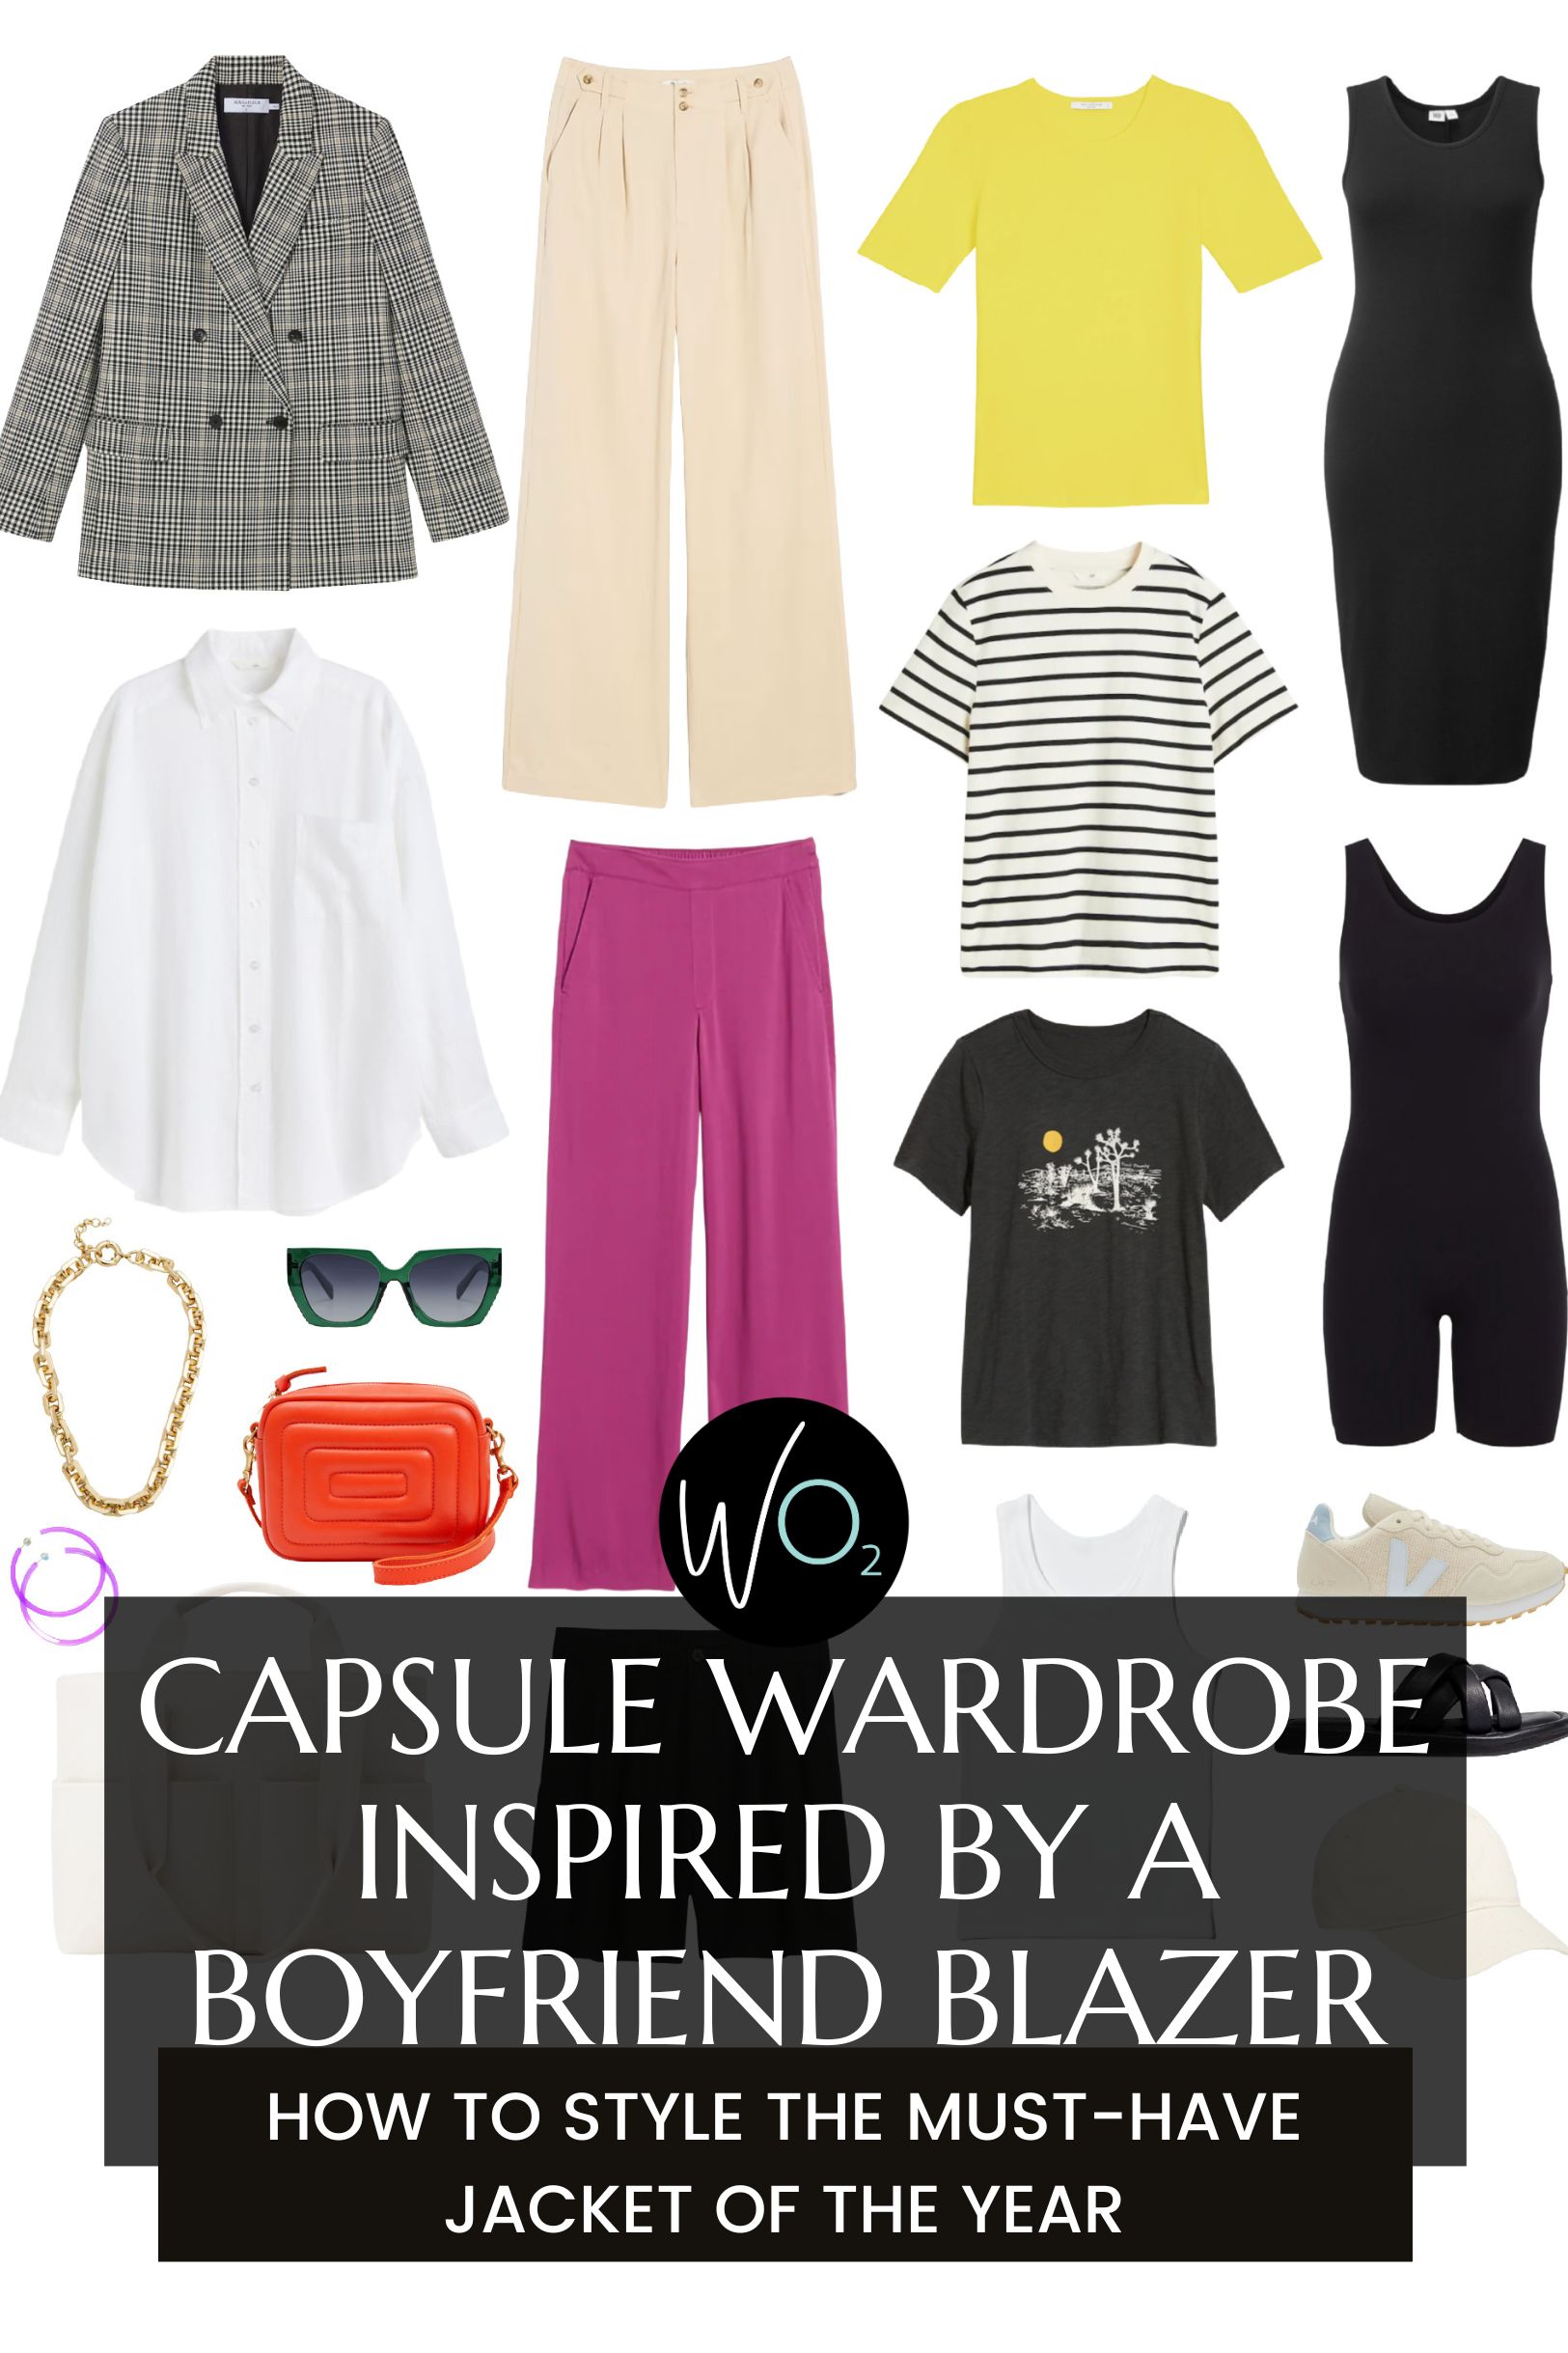 tips on styling a boyfriend blazer with a capsule wardrobe for spring to summer by Alison Gary of Wardrobe Oxygen